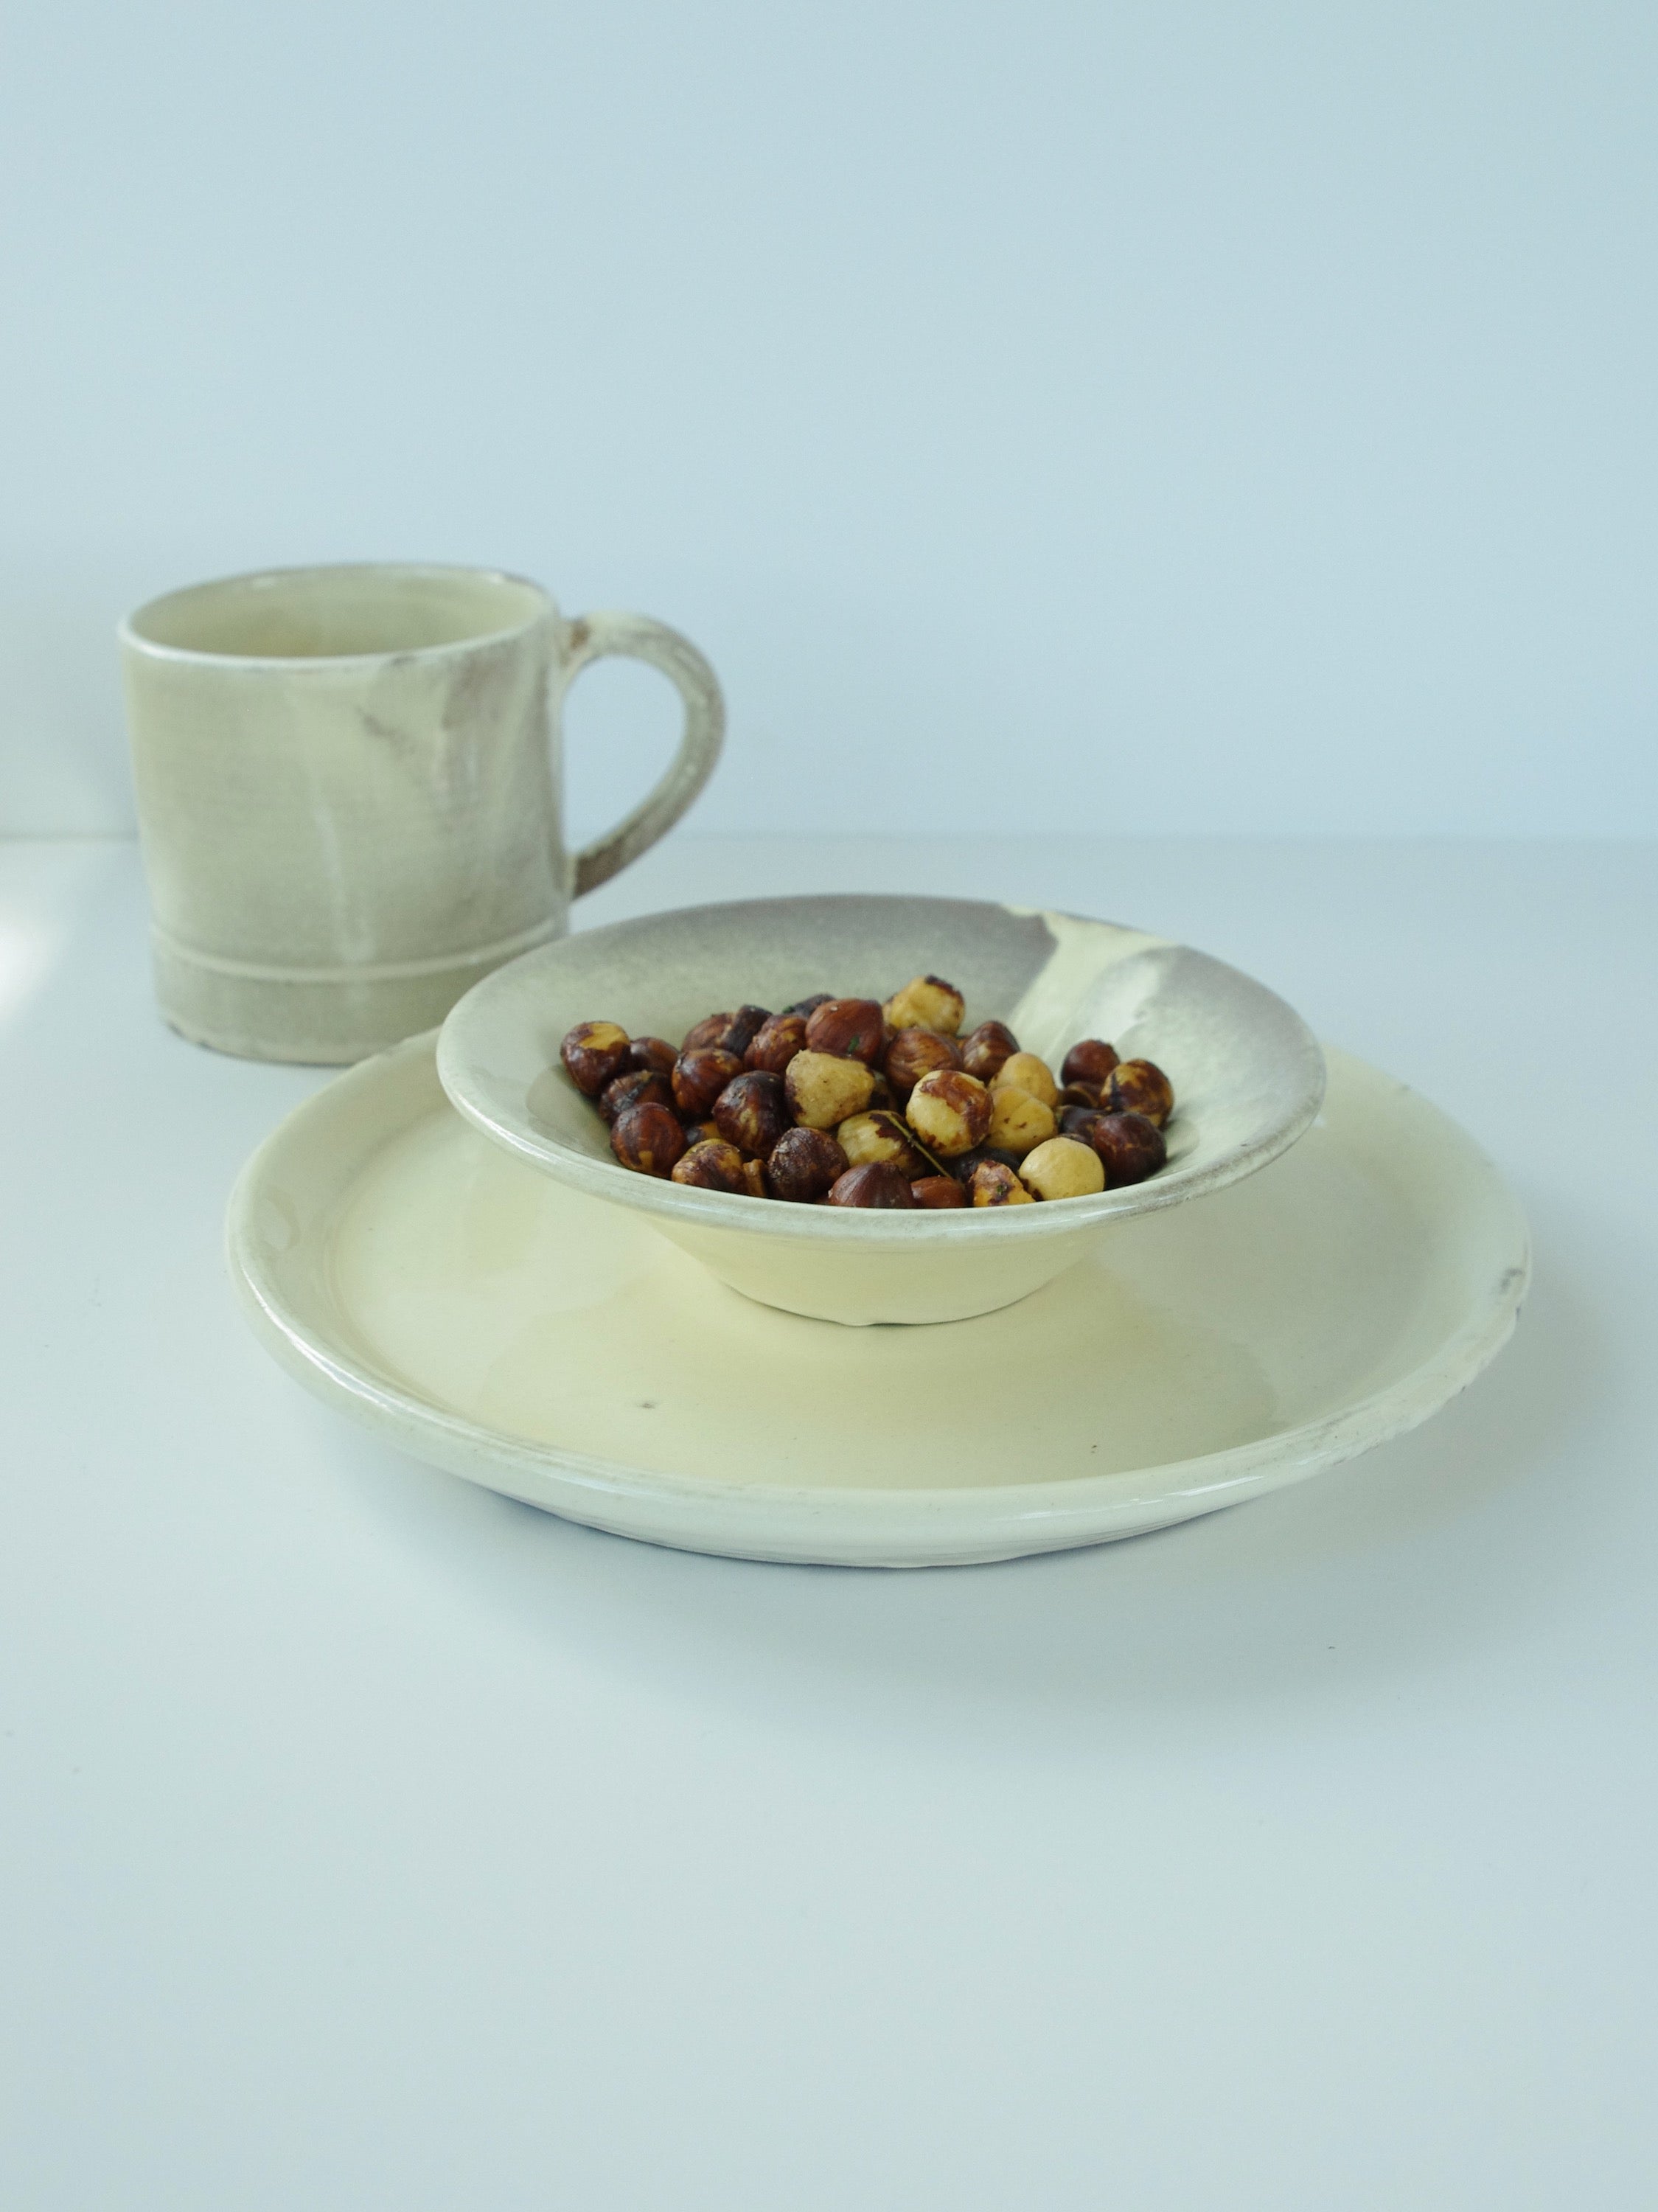 Avoine et Terre Small Conical Bowl—Oat Cereal Bowl French Dry Goods Avoine et terre ceramics Avoine et Terre conical bowl French ceramics French cereal bowl Moroccan ceramics Avoine_et_Terre_Oat_Conical_Bowl-3C946618-2249x3000